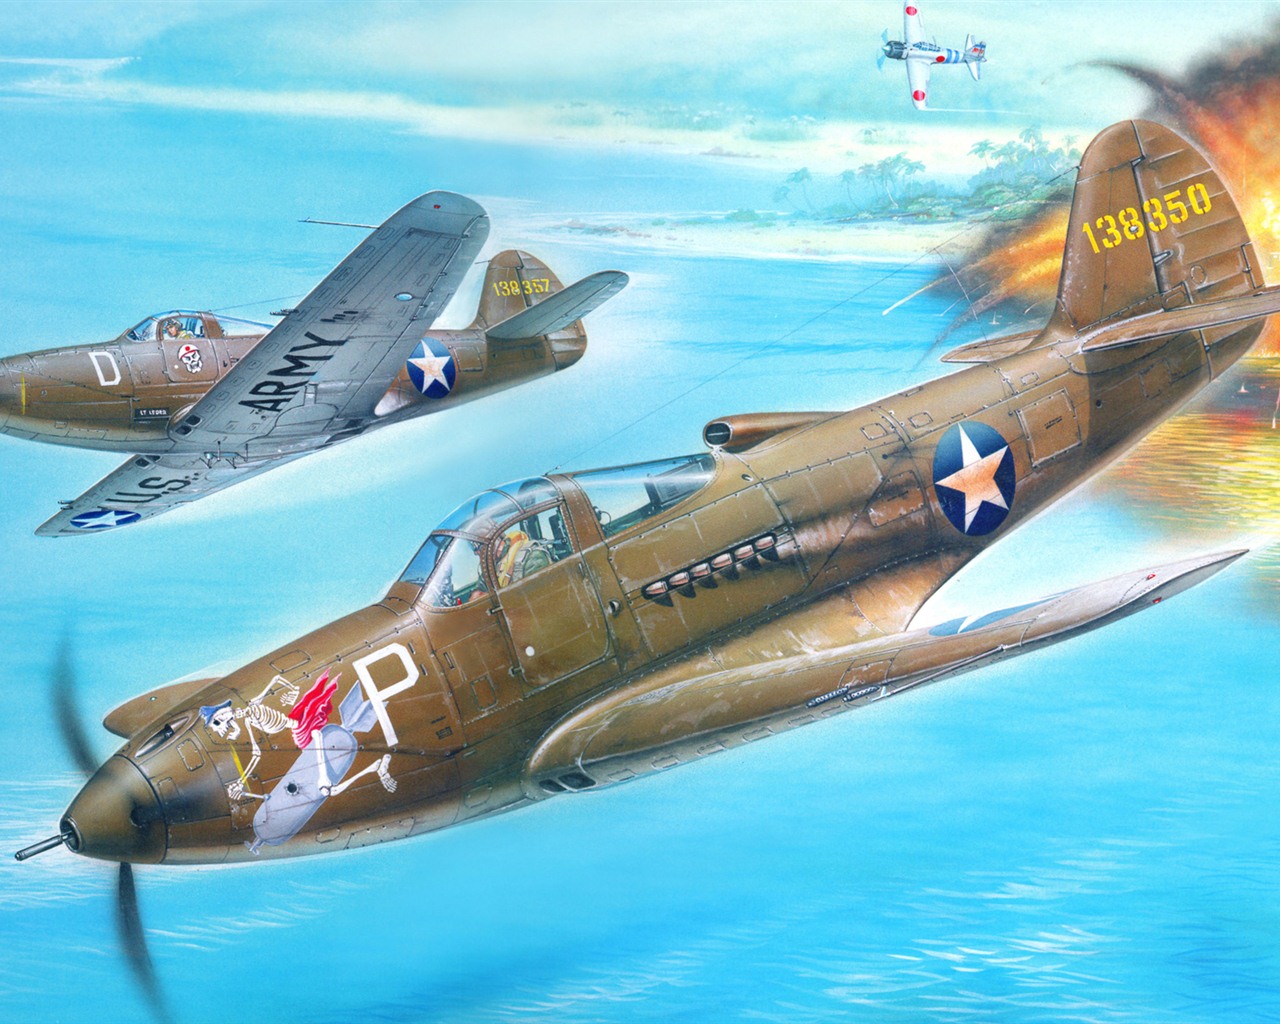 Military aircraft flight exquisite painting wallpapers #17 - 1280x1024